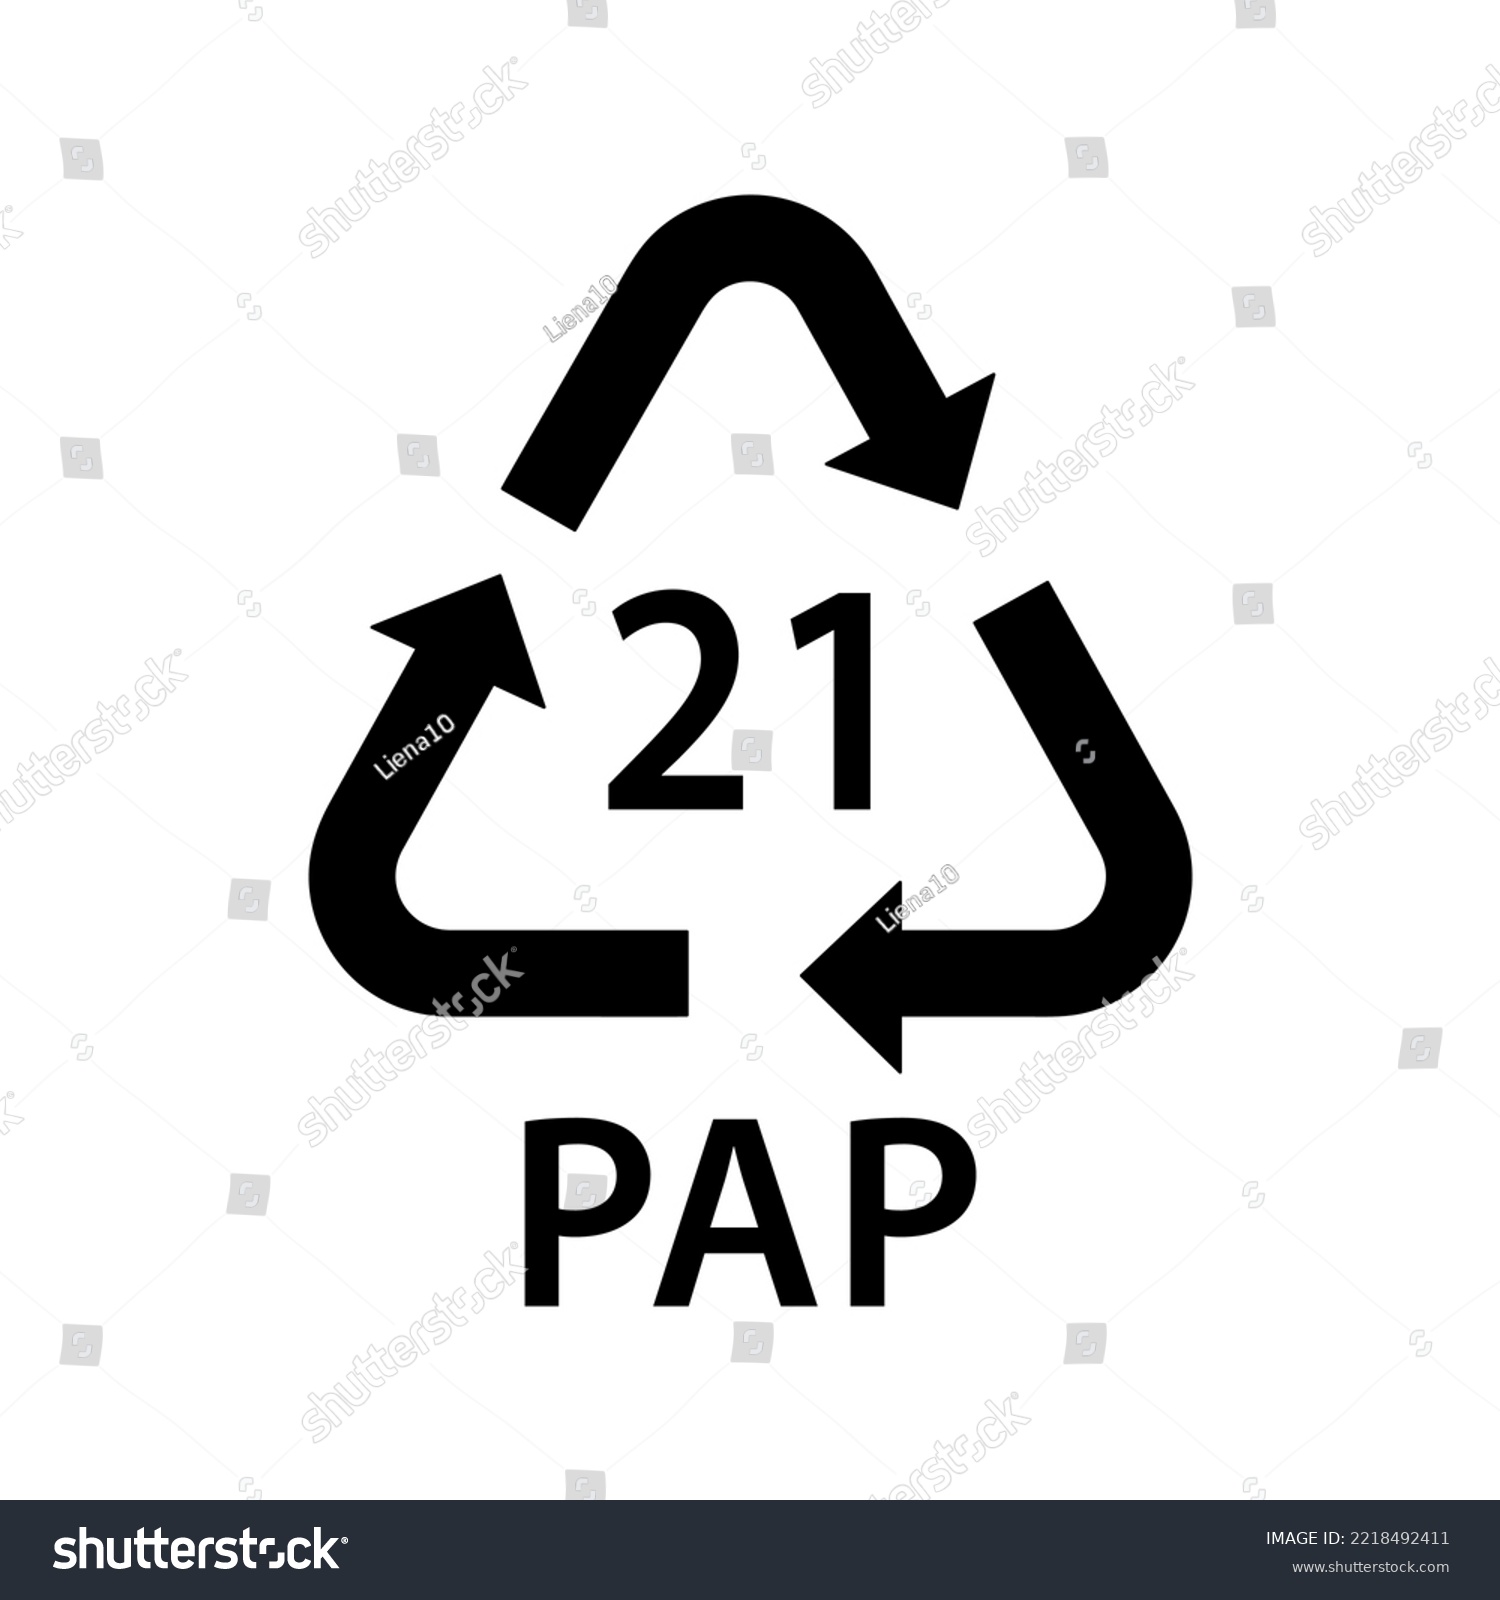 SVG of paper recycling code PAP 21, non-corrugated fiberboard, Cereal and snack boxes symbol, ecology recycling sign, identification code, package waste black fill icon svg